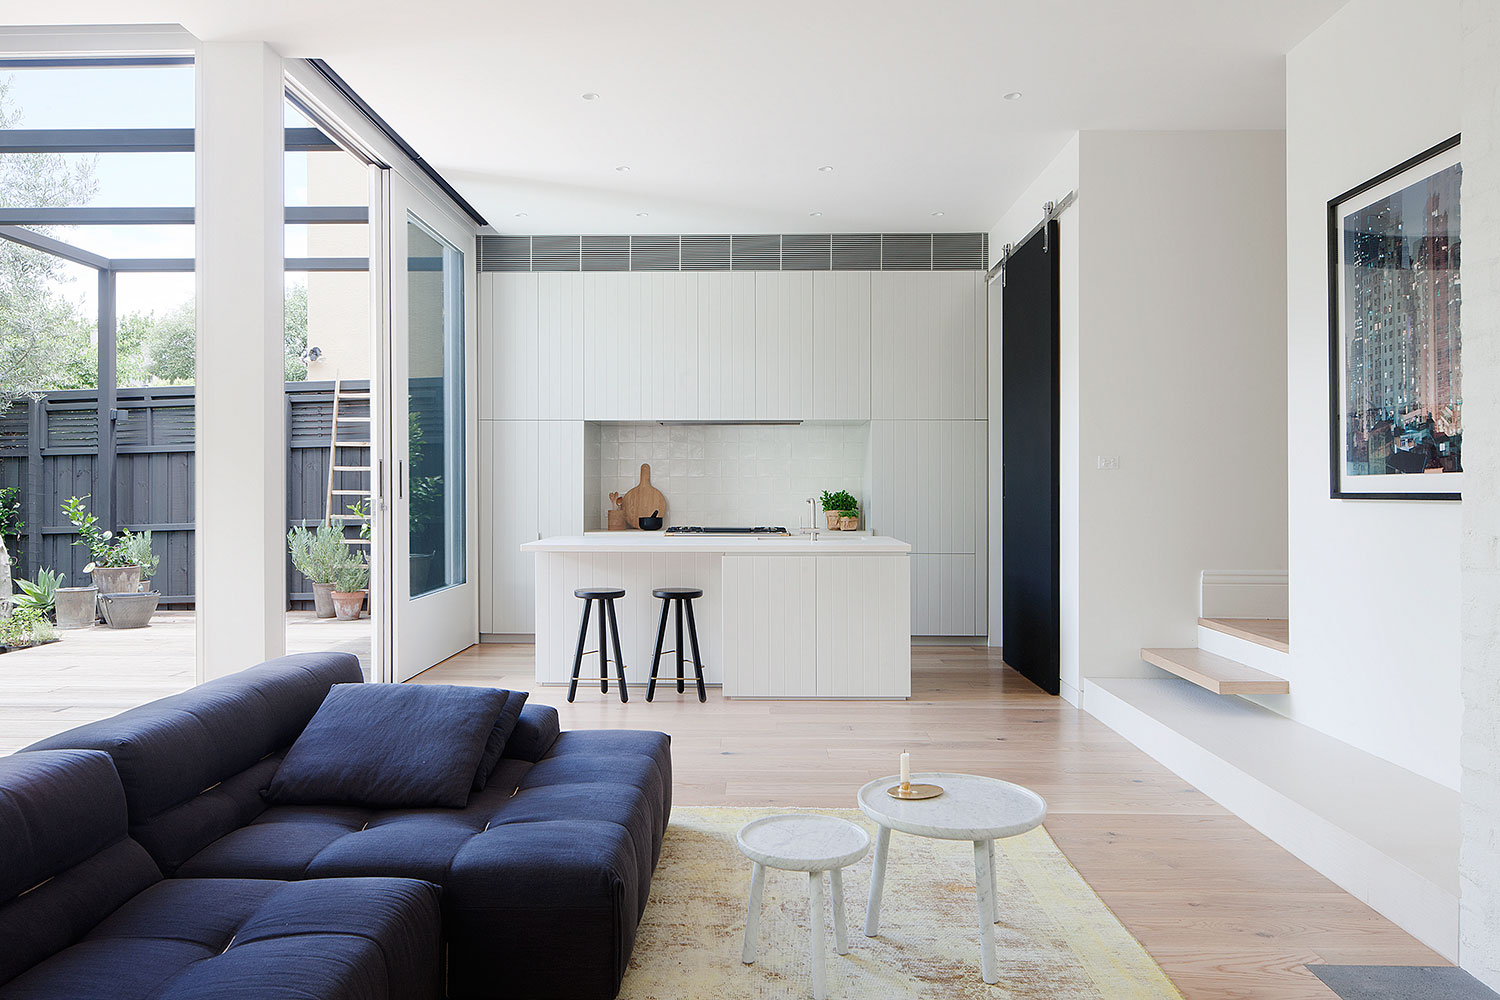 Robson Rak Architects and Made by Cohen – Elwood